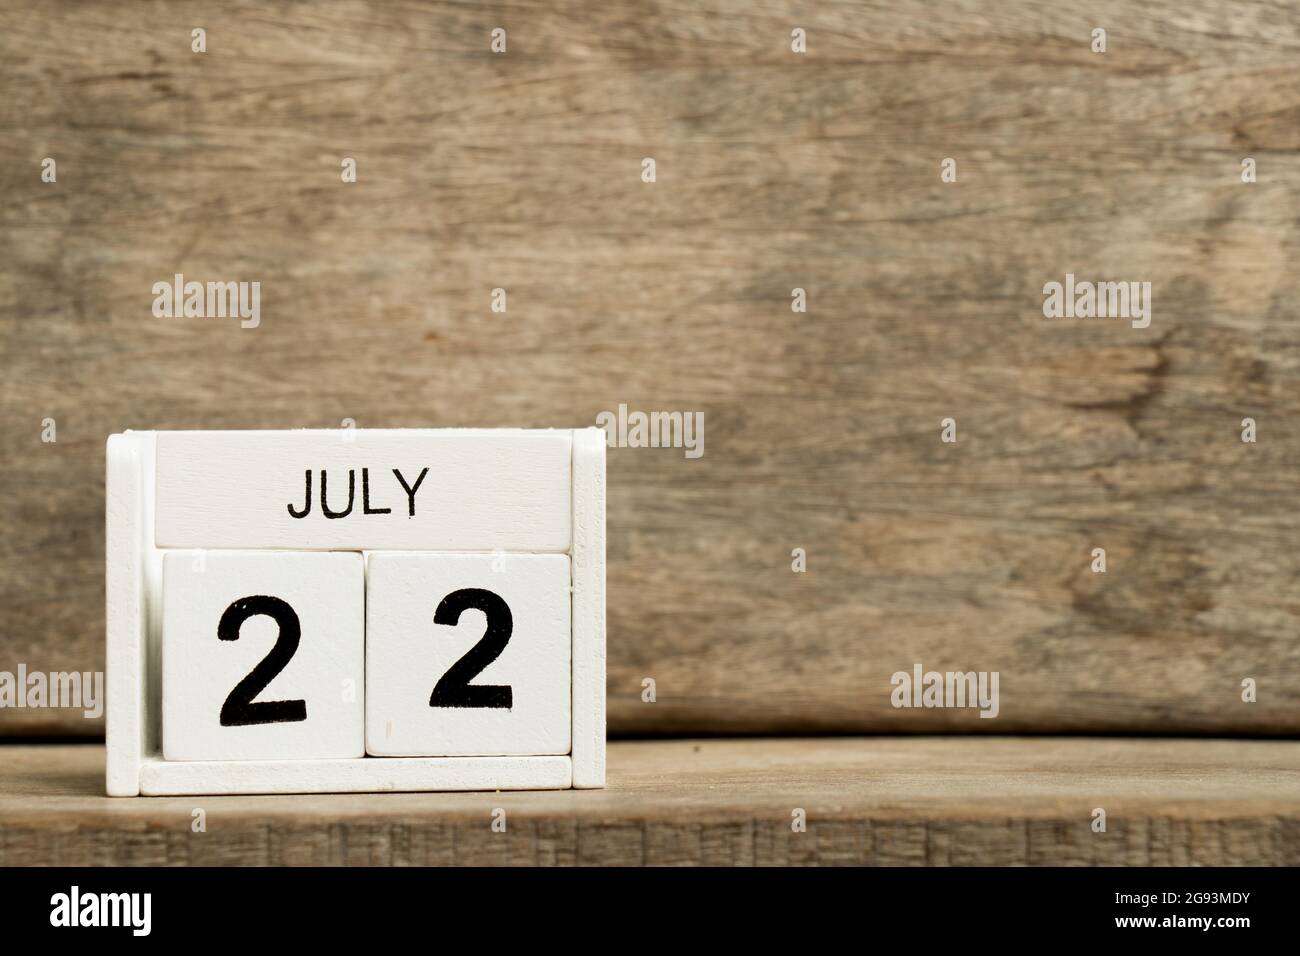 White block calendar present date 22 and month July on wood background Stock Photo